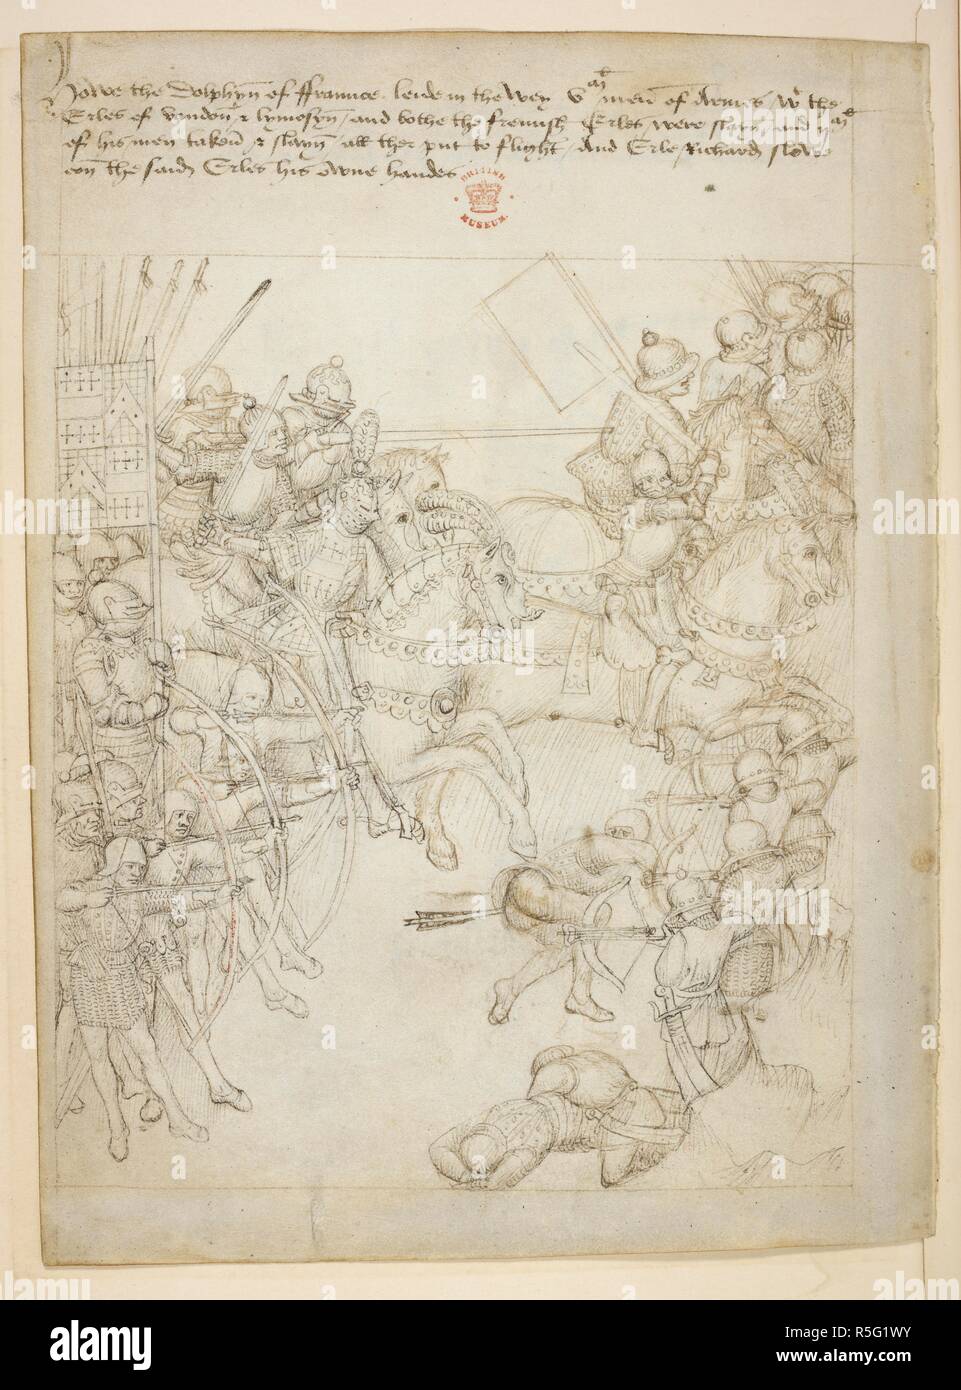 Pageant XL Richard Beauchamp, Earl of Warwick, leading the English army against the French under the Dauphin, 1419. Warwick, wearing a helmet decorated with an ostrich plume, leads his knights in pursuit of the retreating french cavalry. English archers armed with their longbows face French archers armed with cross bows. Beauchamp Pageants. S. Netherlands [Bruges?]; after 1483. Source: Cotton Julius E. IV, art. 6, f.20v. Language: English. Stock Photo